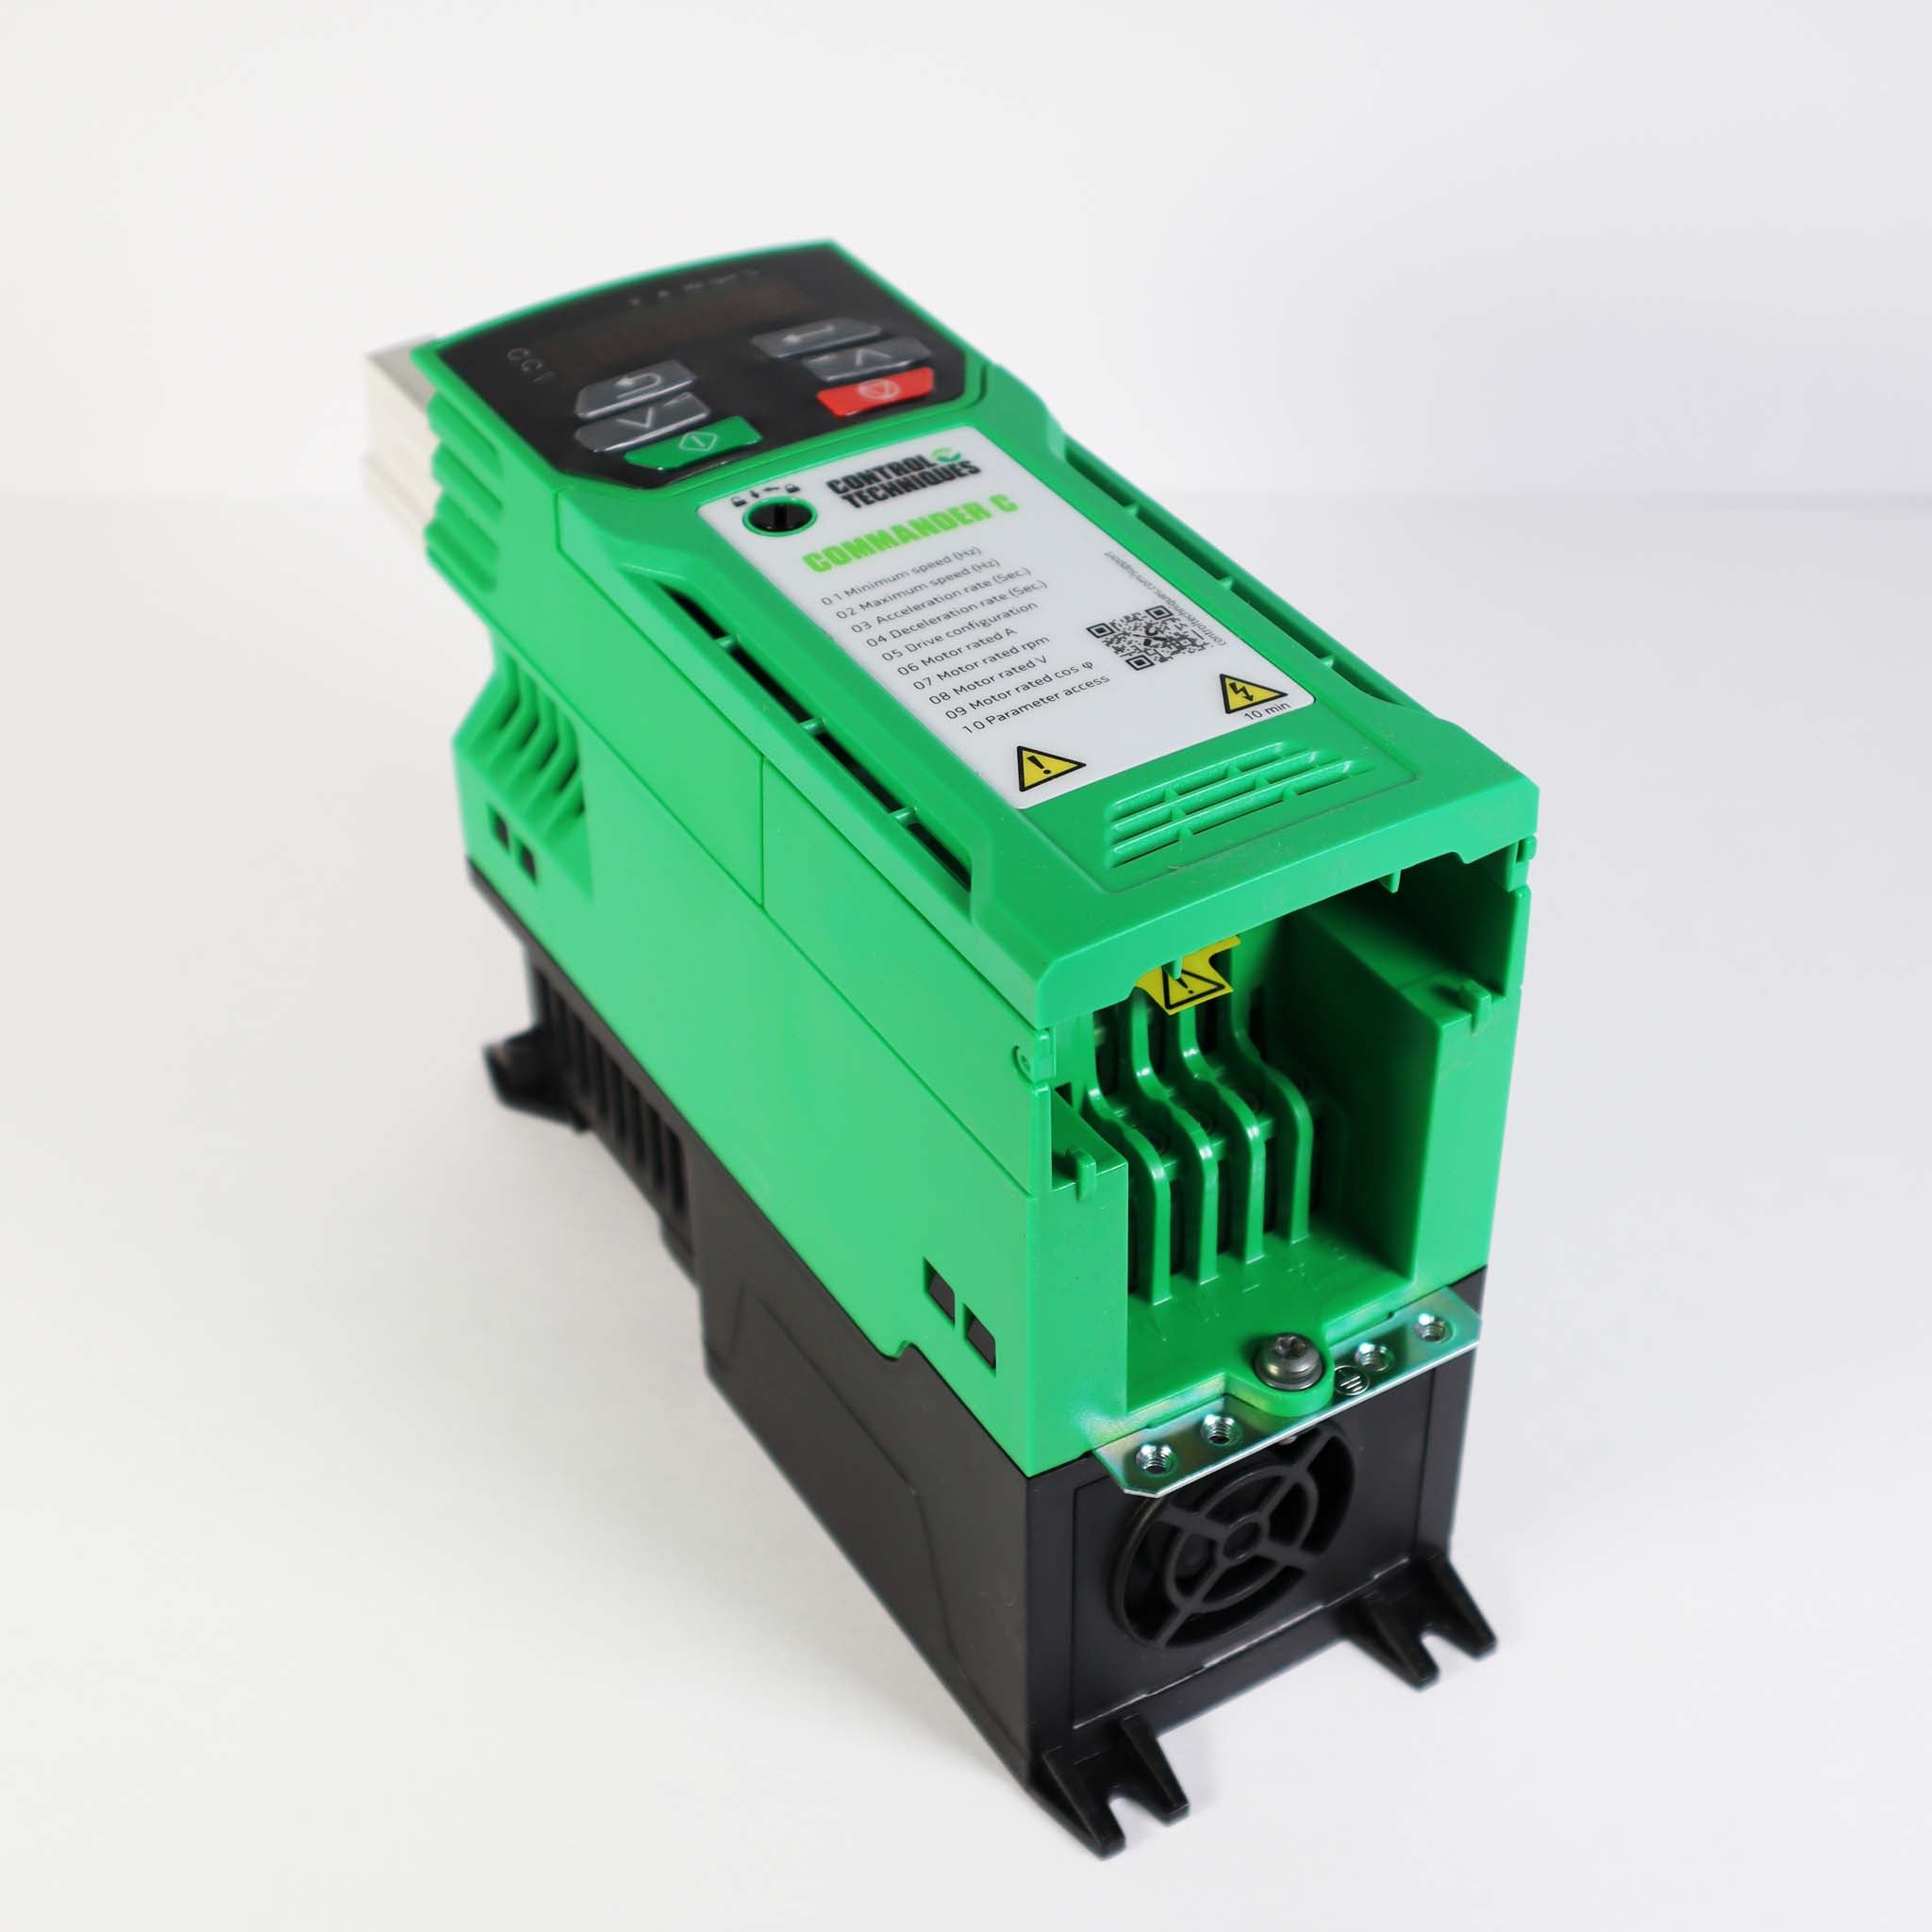 Hysecurity MX4210 Variable Frequency Drive Unit (VFD), Modbus, 208-230VAC